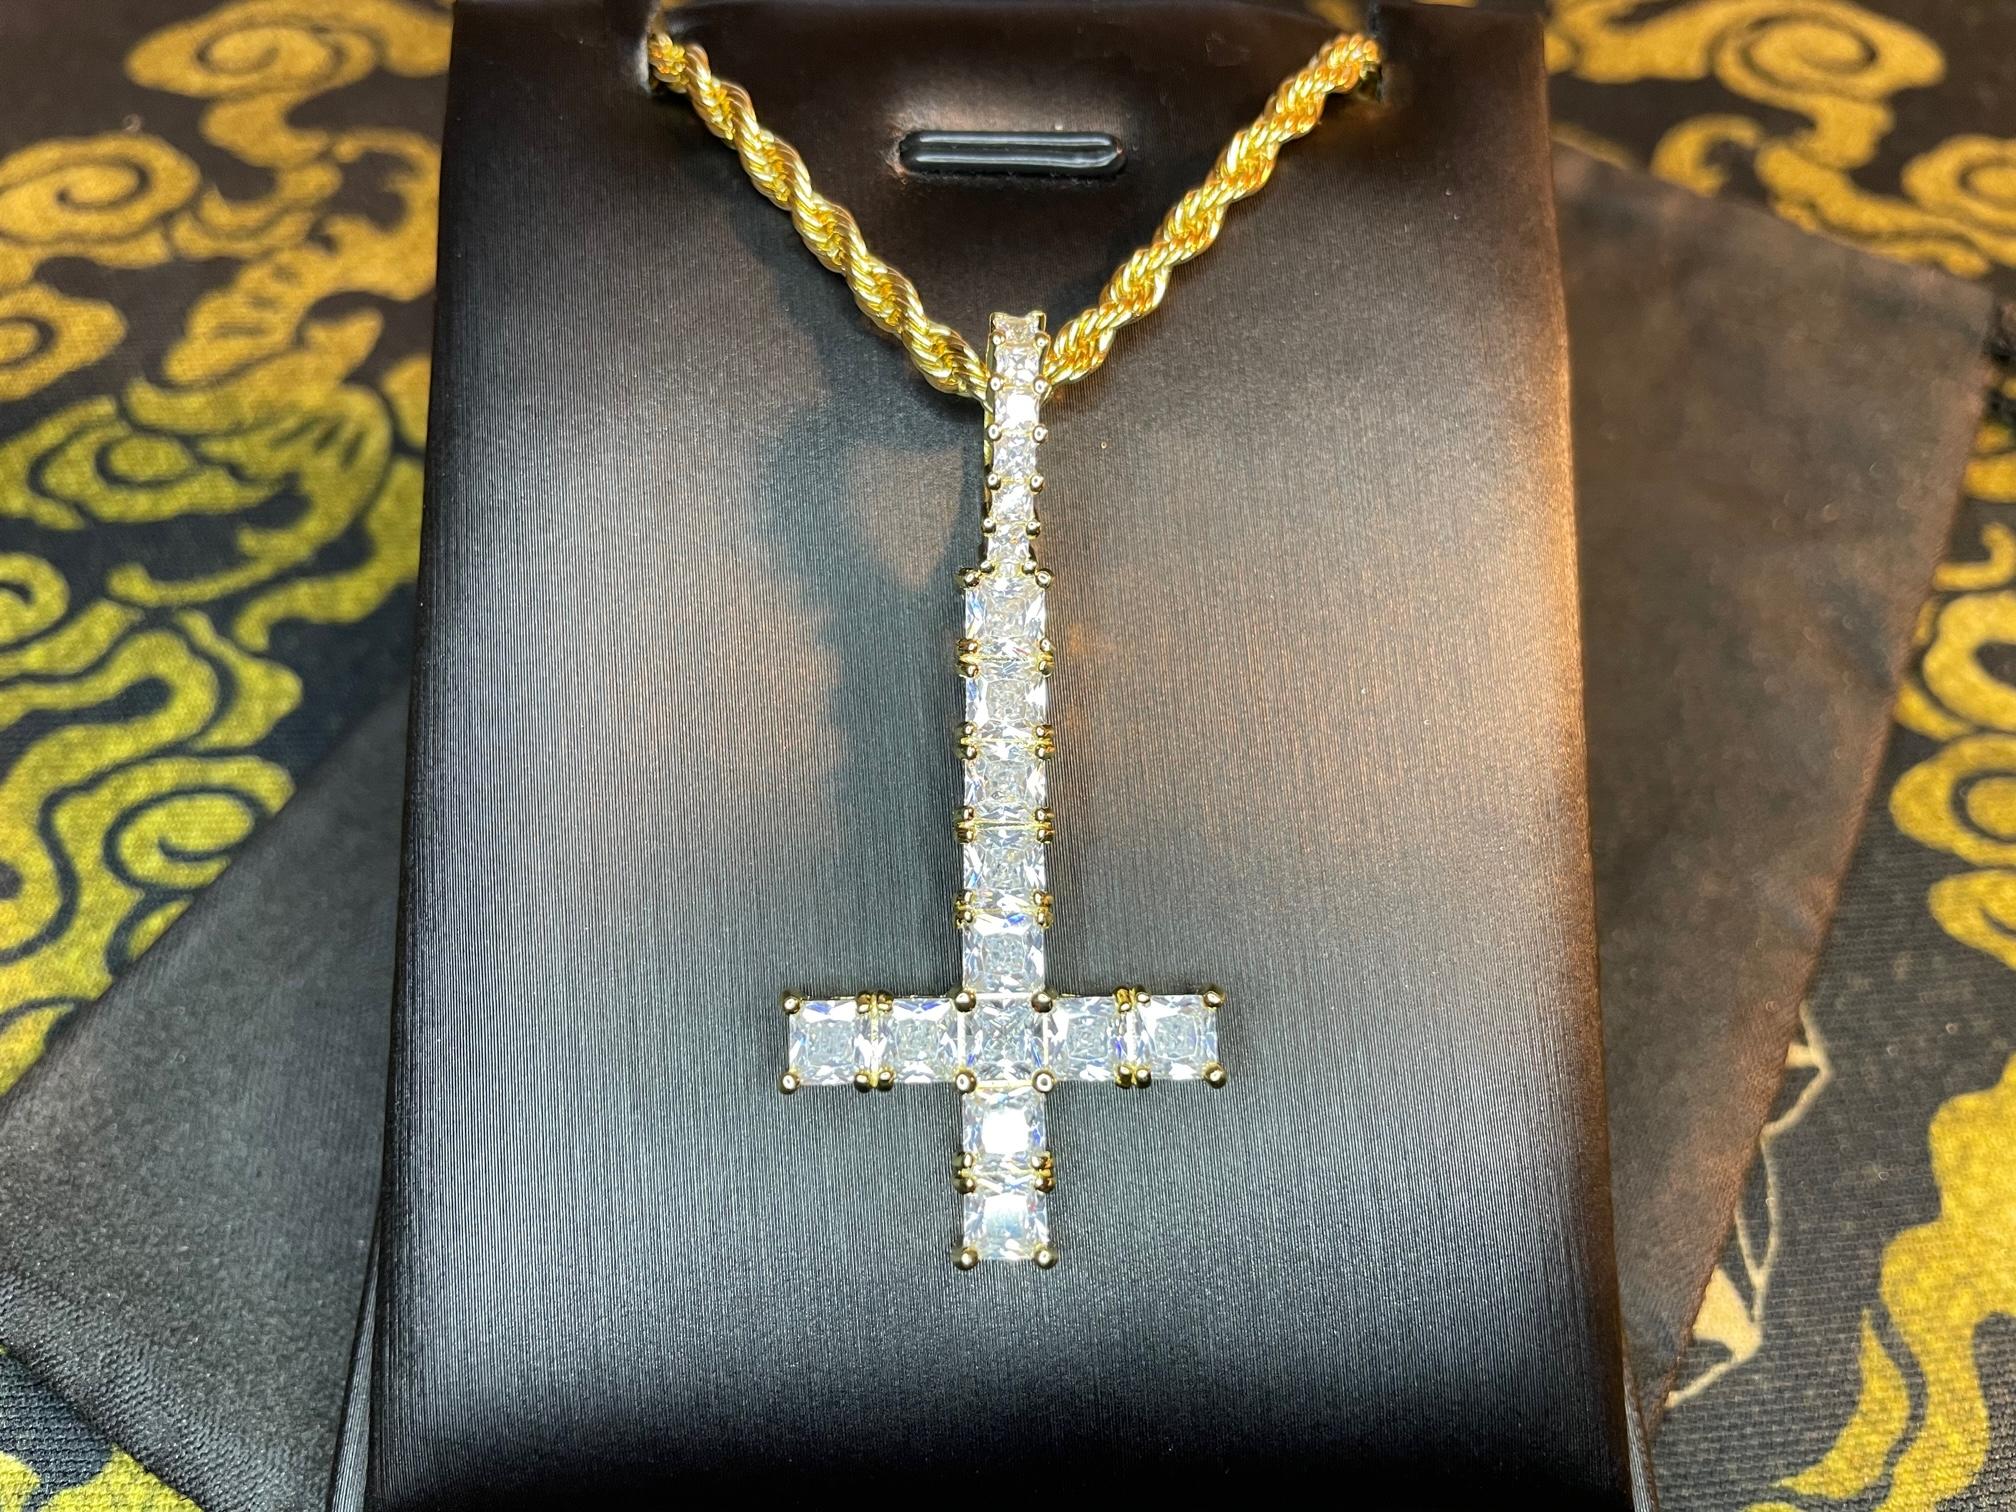 diamond upside down inverted cross 14k gold pendant rope necklace goth minimalist retro satanic pagan wiccan occult darkness jewelry